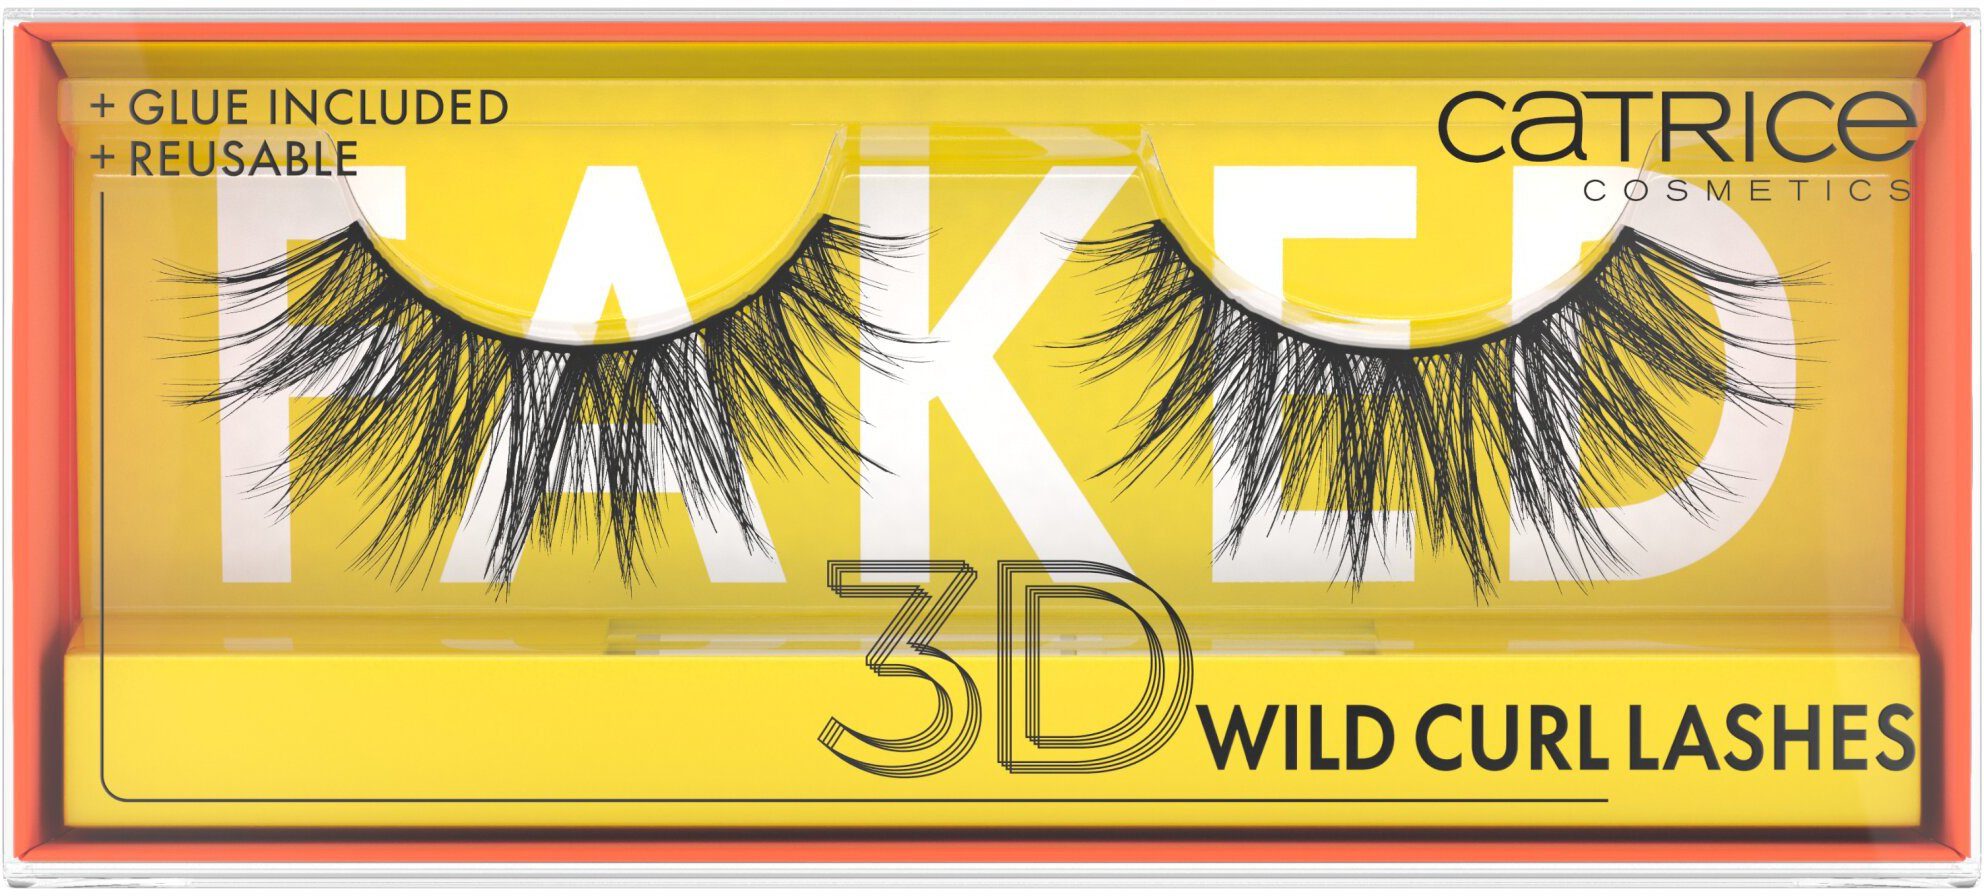 3 Lashes, Wild Curl Bandwimpern Catrice Set, Faked 3D